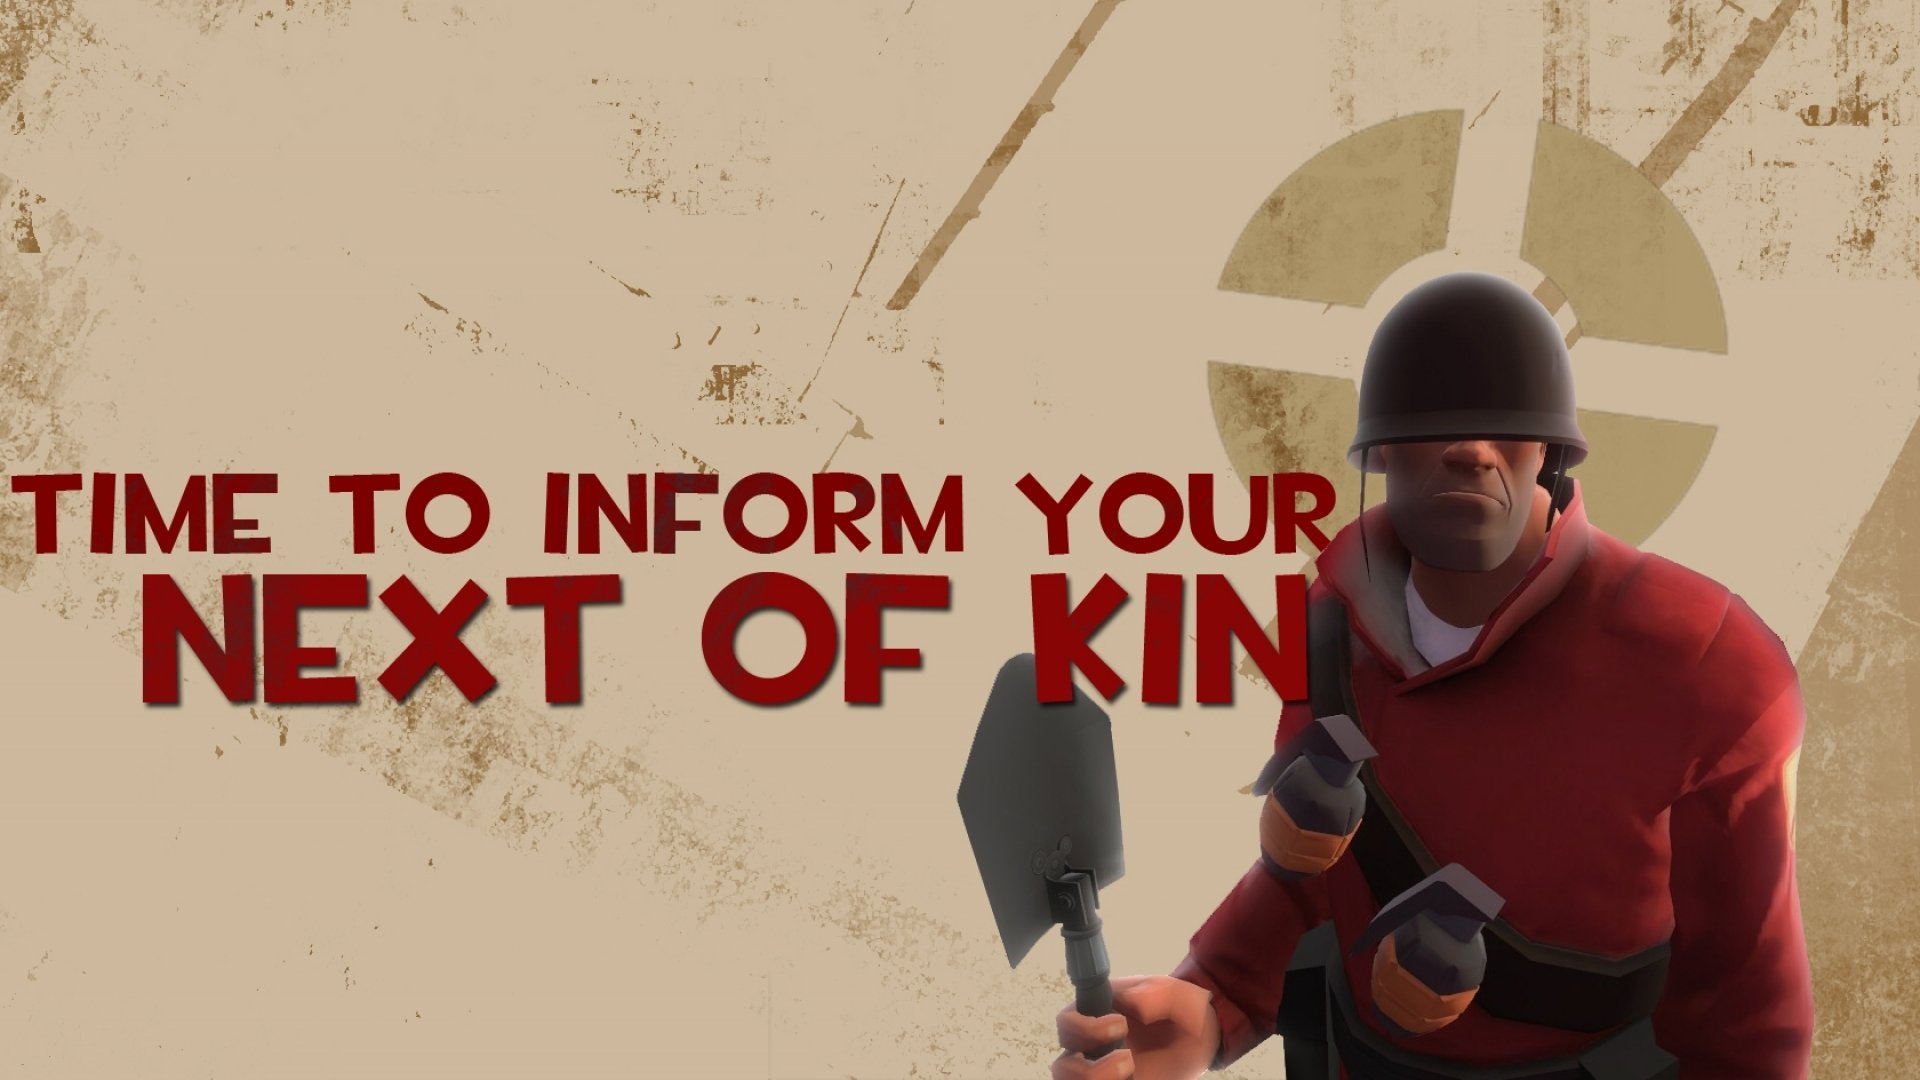 Awesome Team Fortress 2 (TF2) free wallpaper ID:432130 for hd 1920x1080 computer